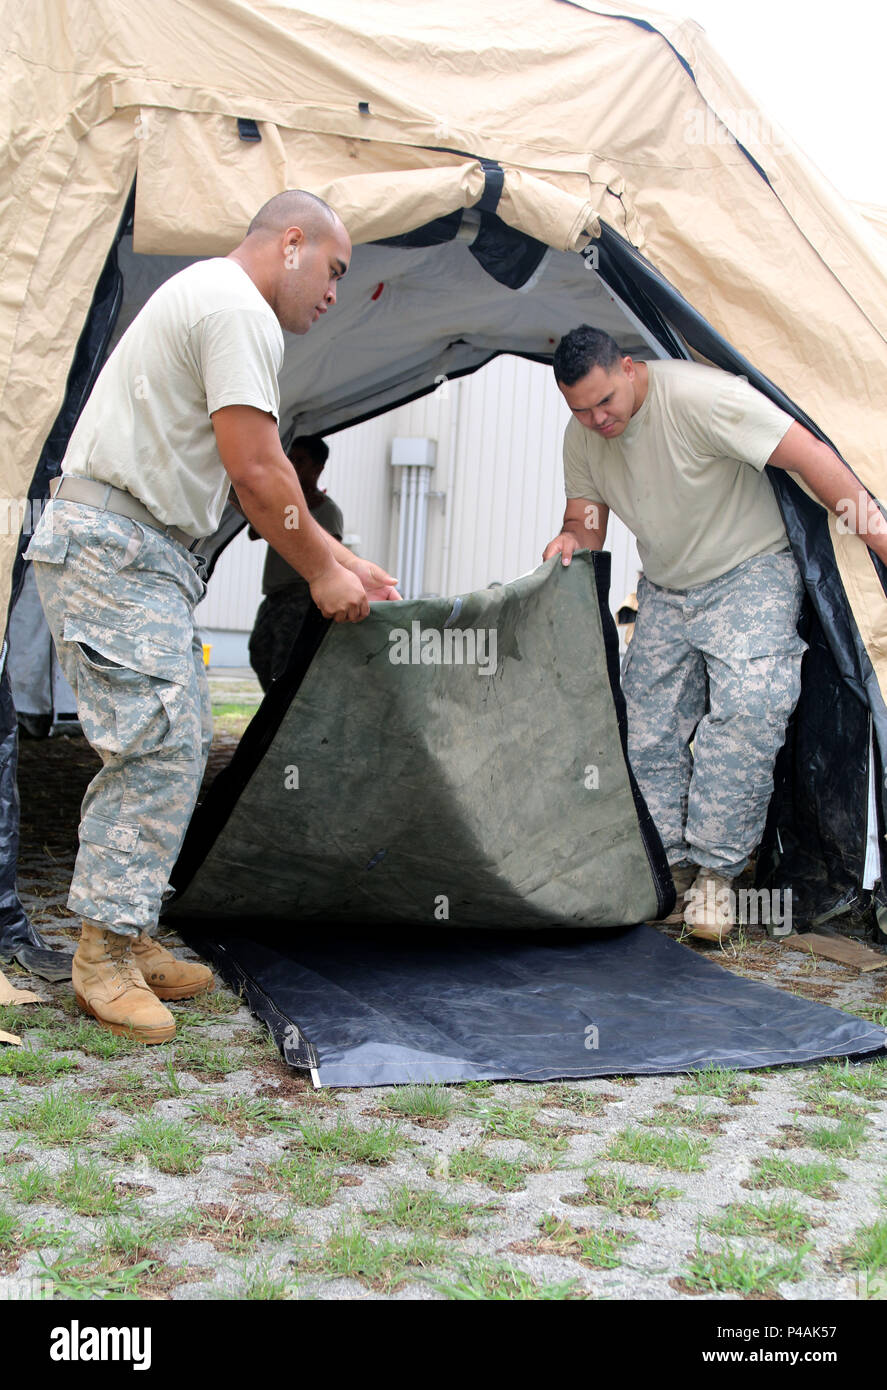 Abraham F. Seei and Salesi M. Fifitaatkins, human resources specialists, 303rd Maneuver Enhancement Brigade, 9th Mission Support Command, ‘wrap up’ portions of the Headquarters and Headquarters Company's Deployable Rapid Assembly Shelter in support of break-down operations during exercise Imua Dawn 2016, Sagamihara Depot, Kanagawa, Japan, June 25, 2016.  Imua Dawn 2016 focused on maneuver support operations and enhancing cooperative capabilities in mobility, Humanitarian Assistance and Disaster Relief (HADAR), Noncombatant Evacuation Operations (NEO), and sustainment support in the event of na Stock Photo